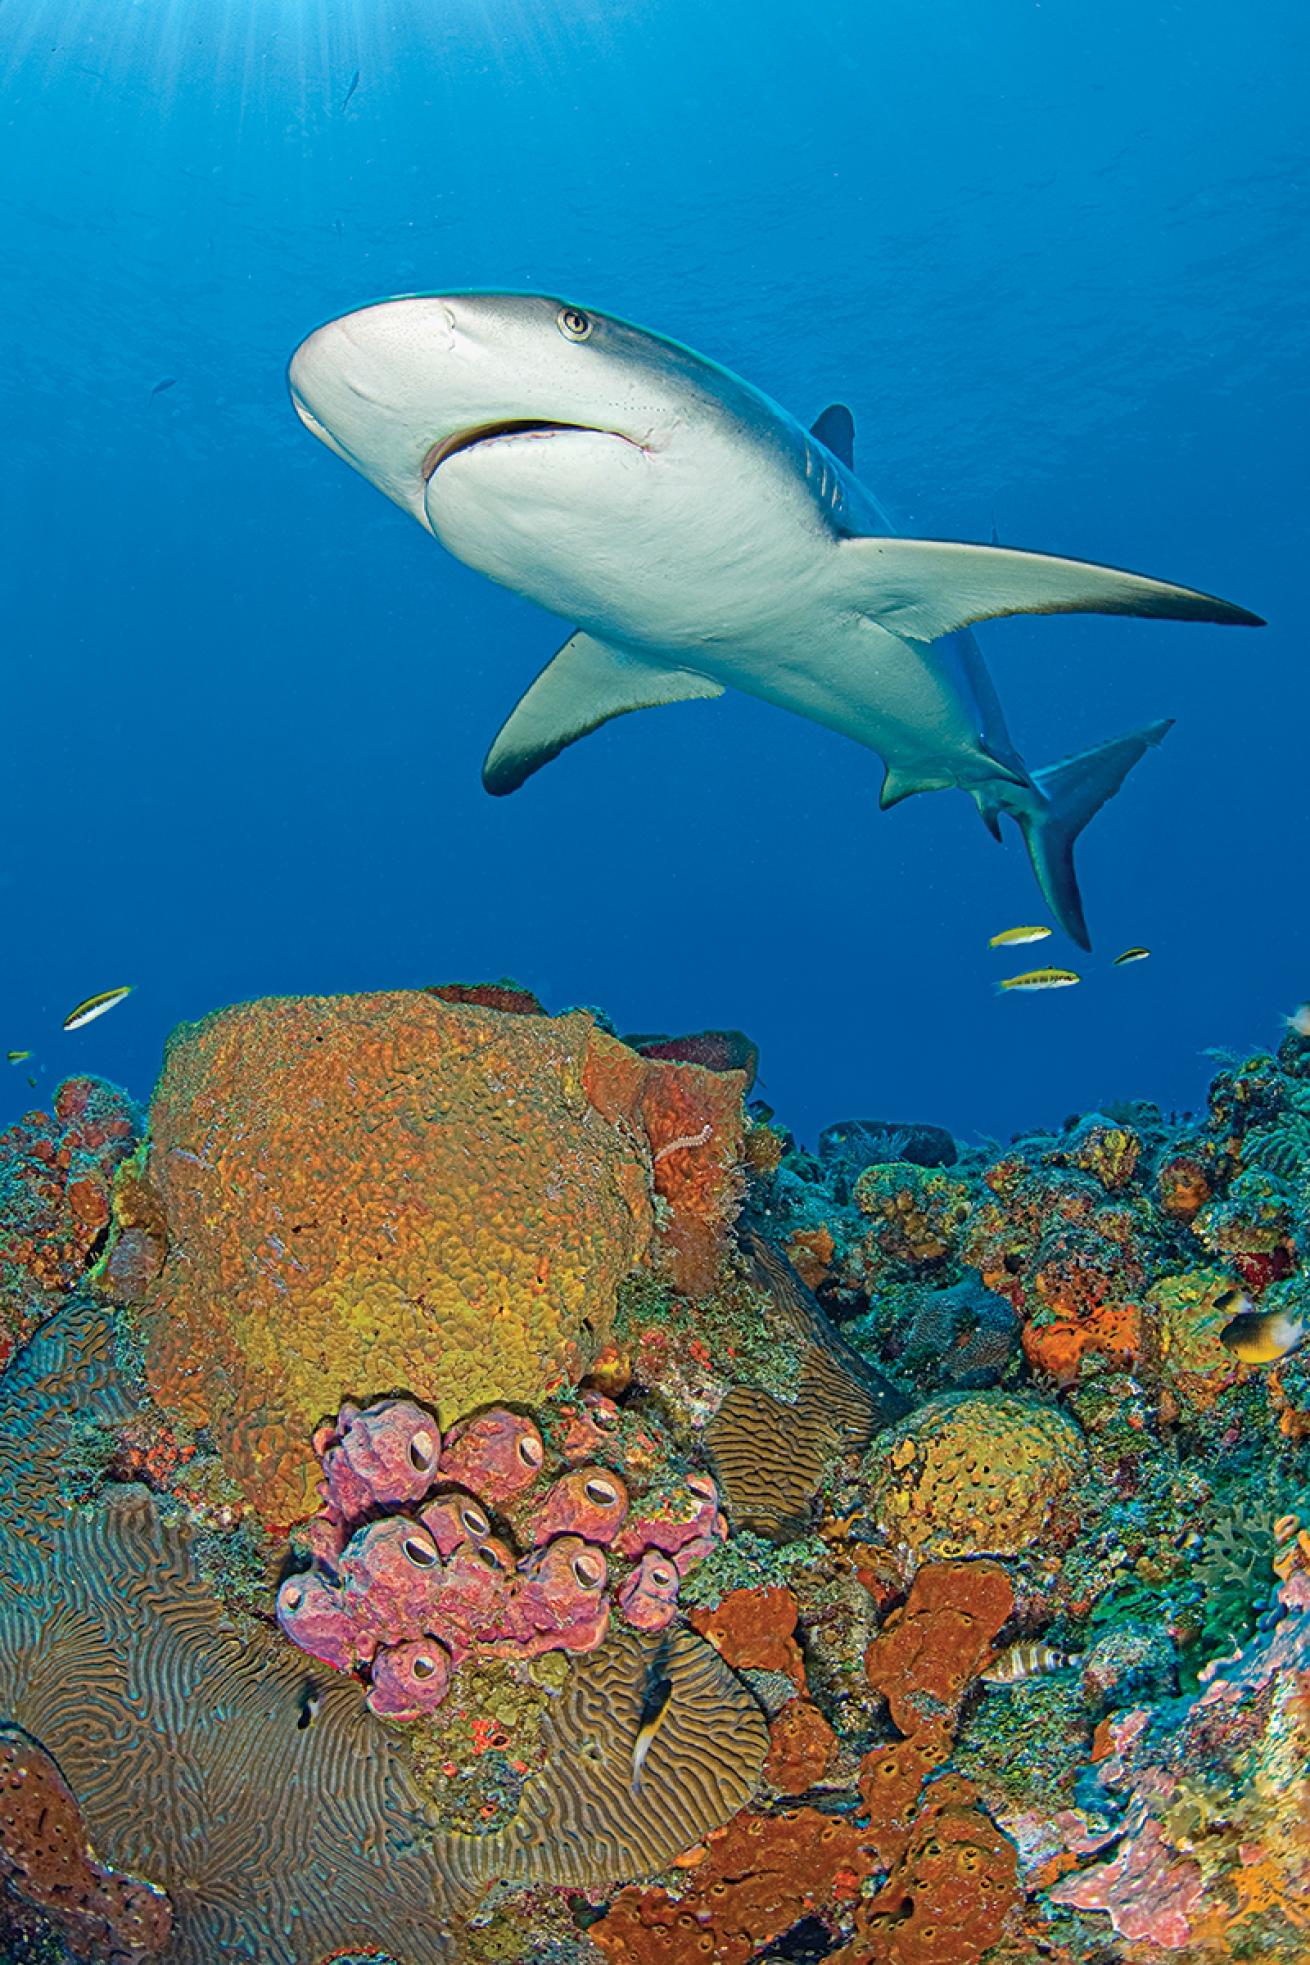 Shark swims over coral during a baited dive